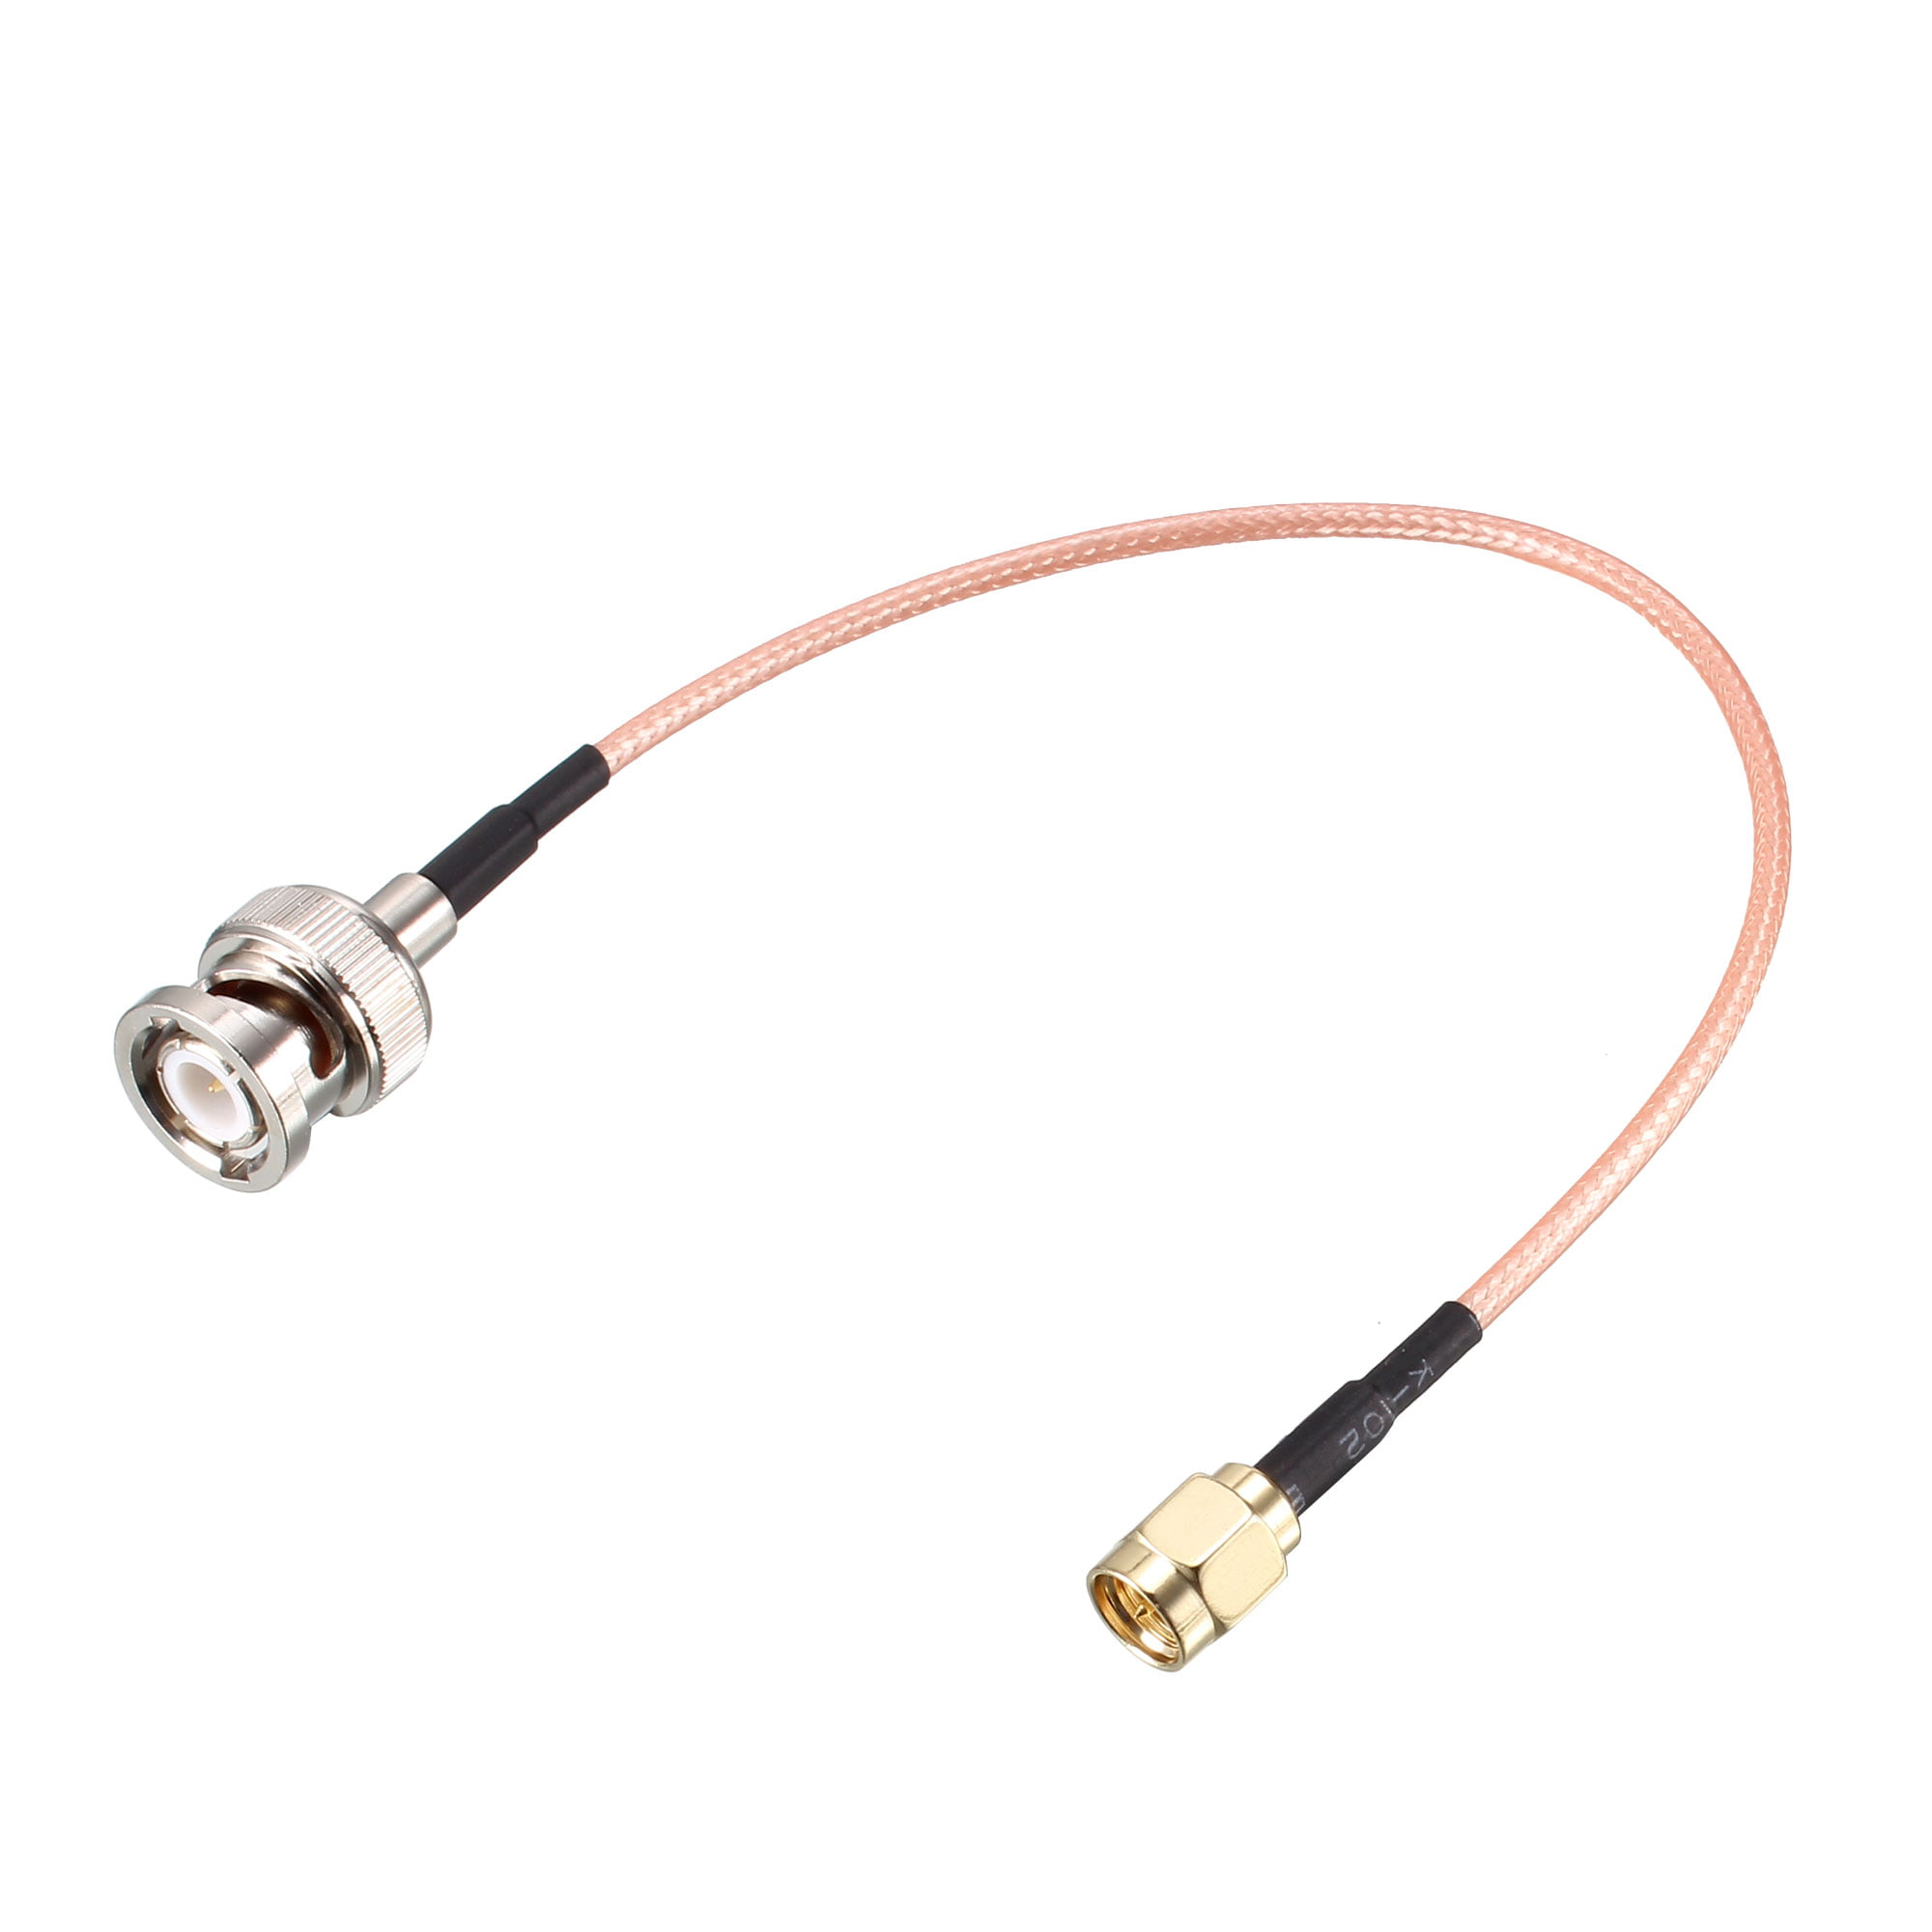 6 feet RG316 TS9 Angle Male to SMA Female O-Ring RF Pigtail Coaxial Cable